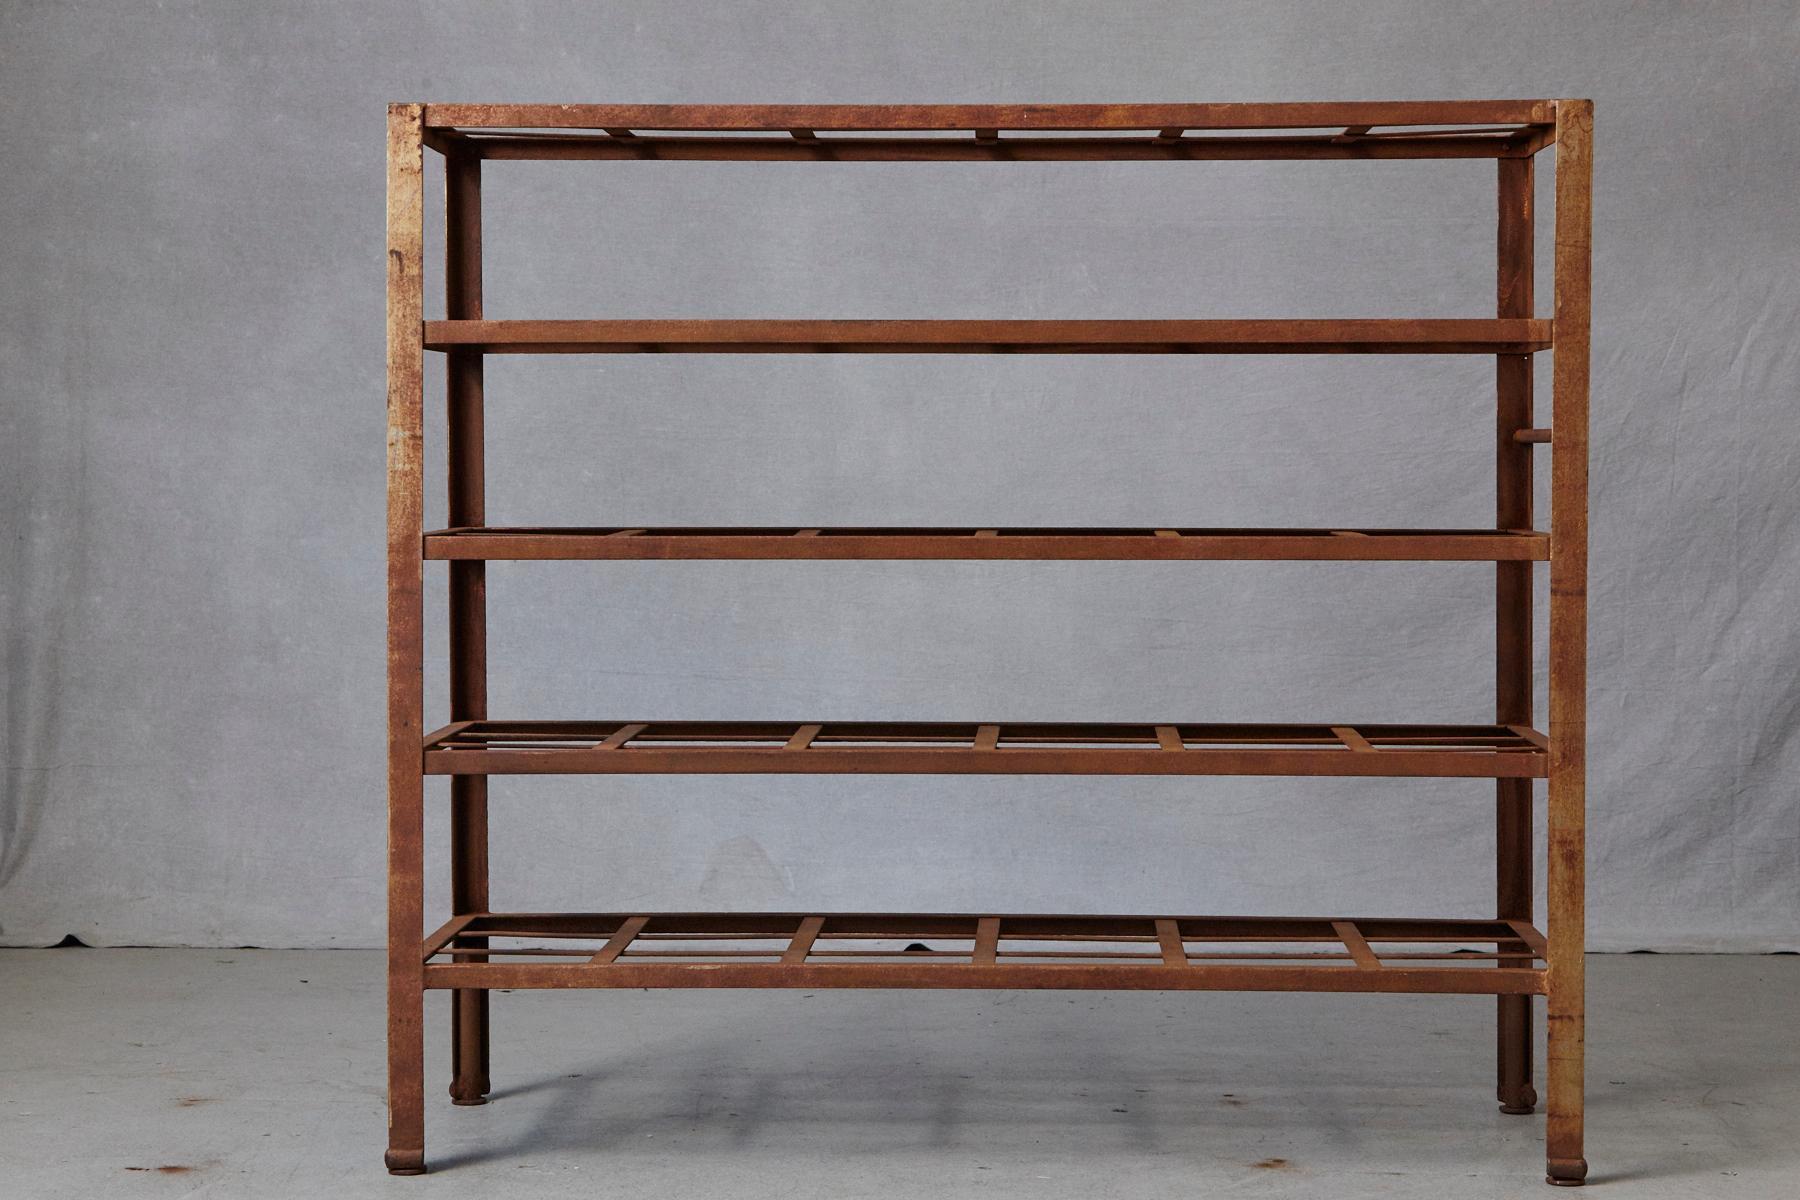 American Industrial 5 Tier Shelf with Grid Shelves for Books or Usage as Seedling Planter For Sale